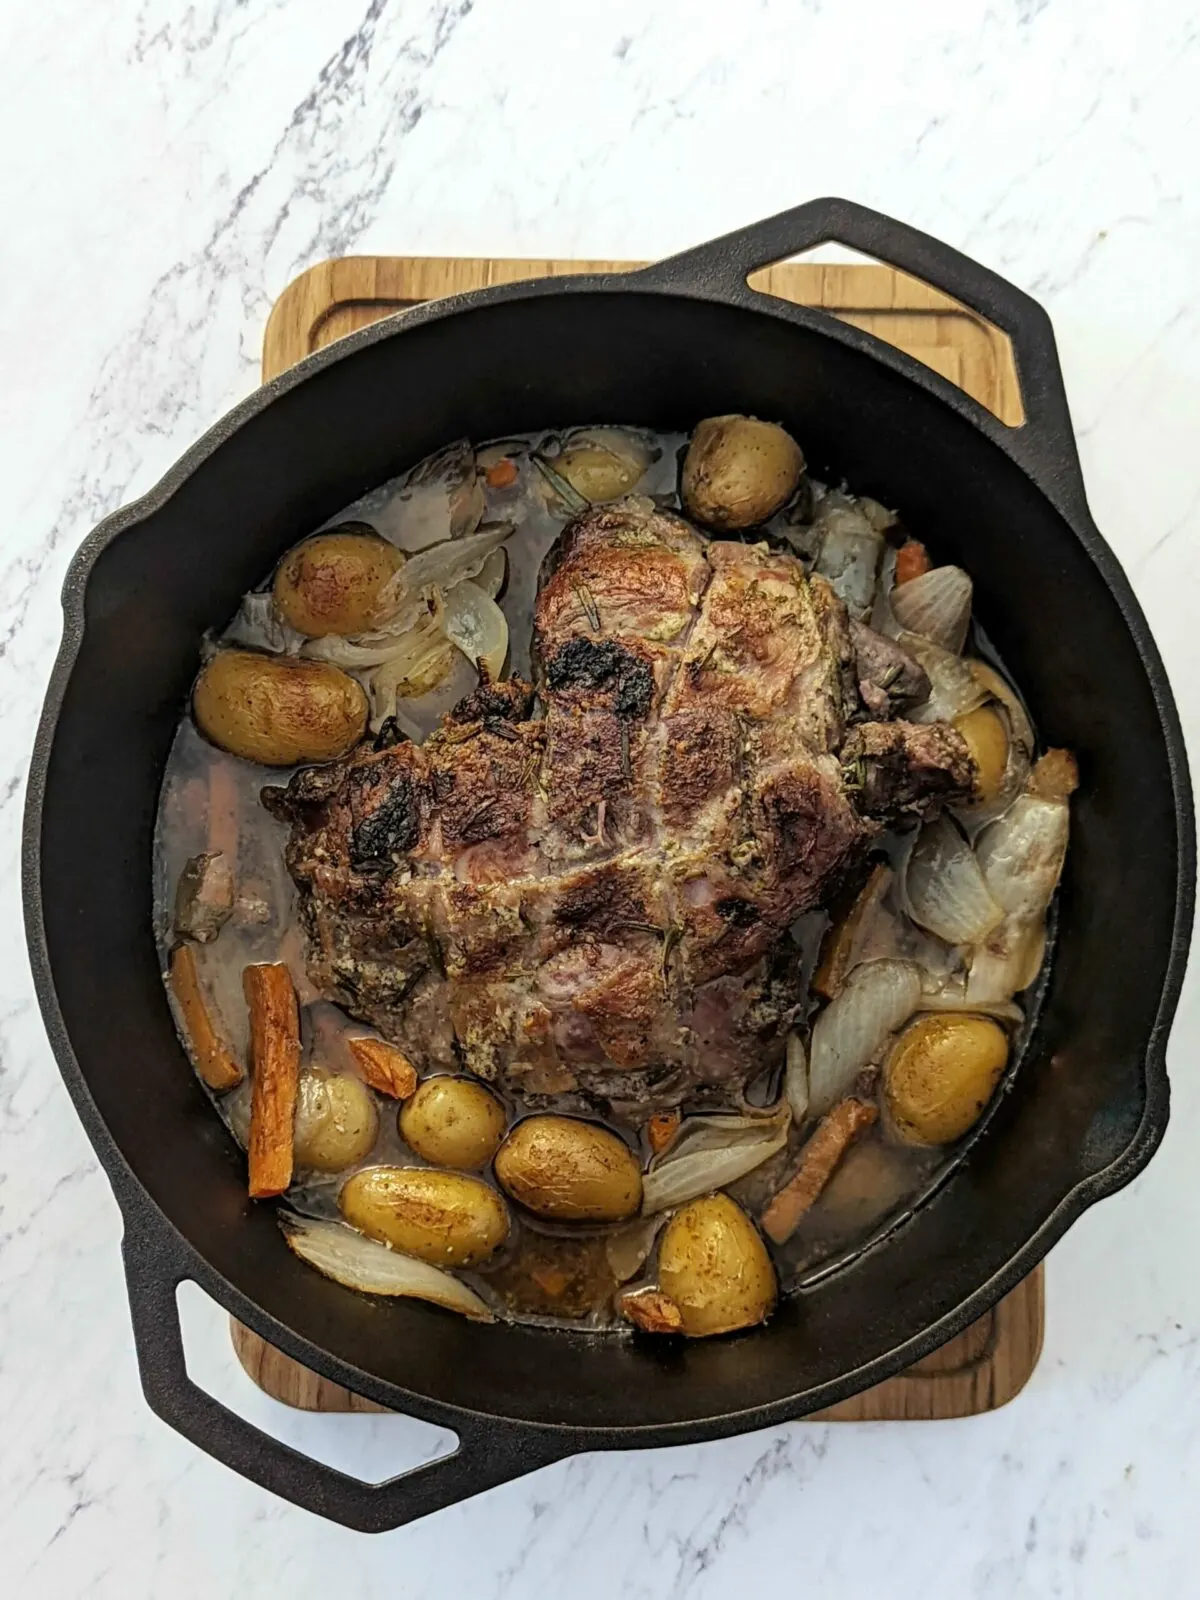 Our boneless leg of lamb in a dutch oven with vegetables.